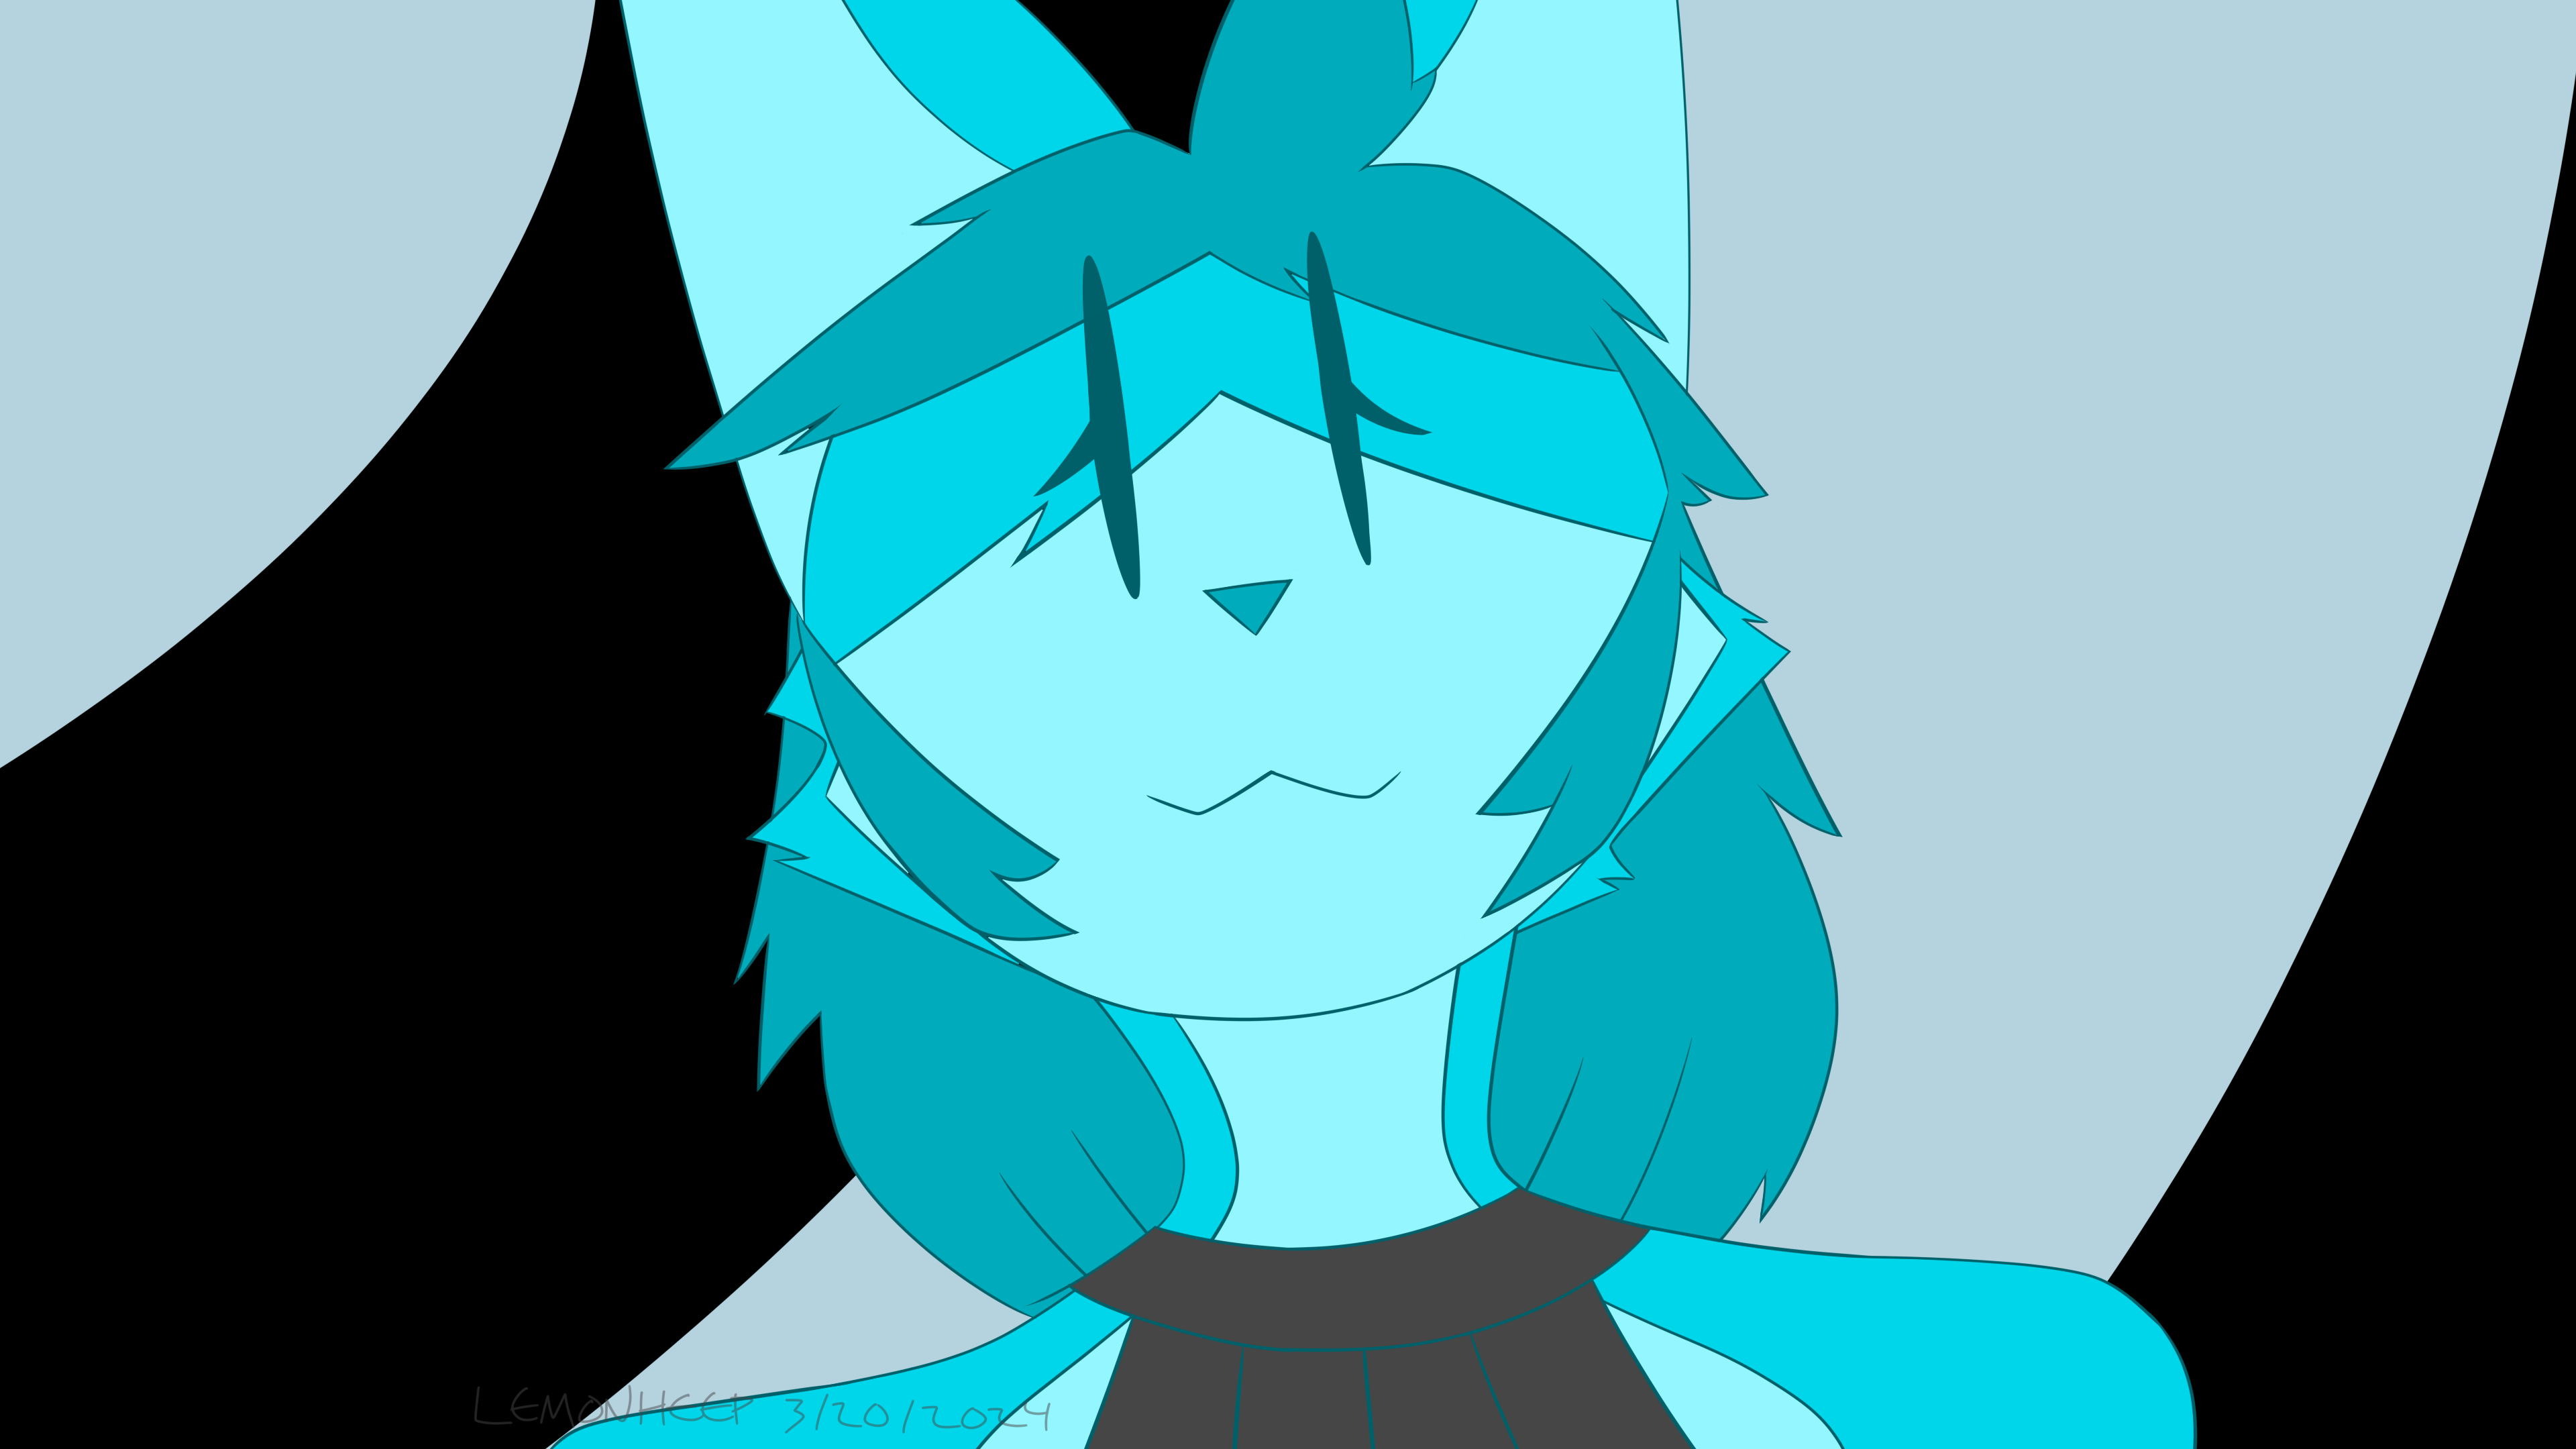 This is a digital artwork of Poppy, a bright blue fox with long, messy hair and a sleeveless sweater. She is looking directly at you, and behind her is a circular pale-blue and black pattern.